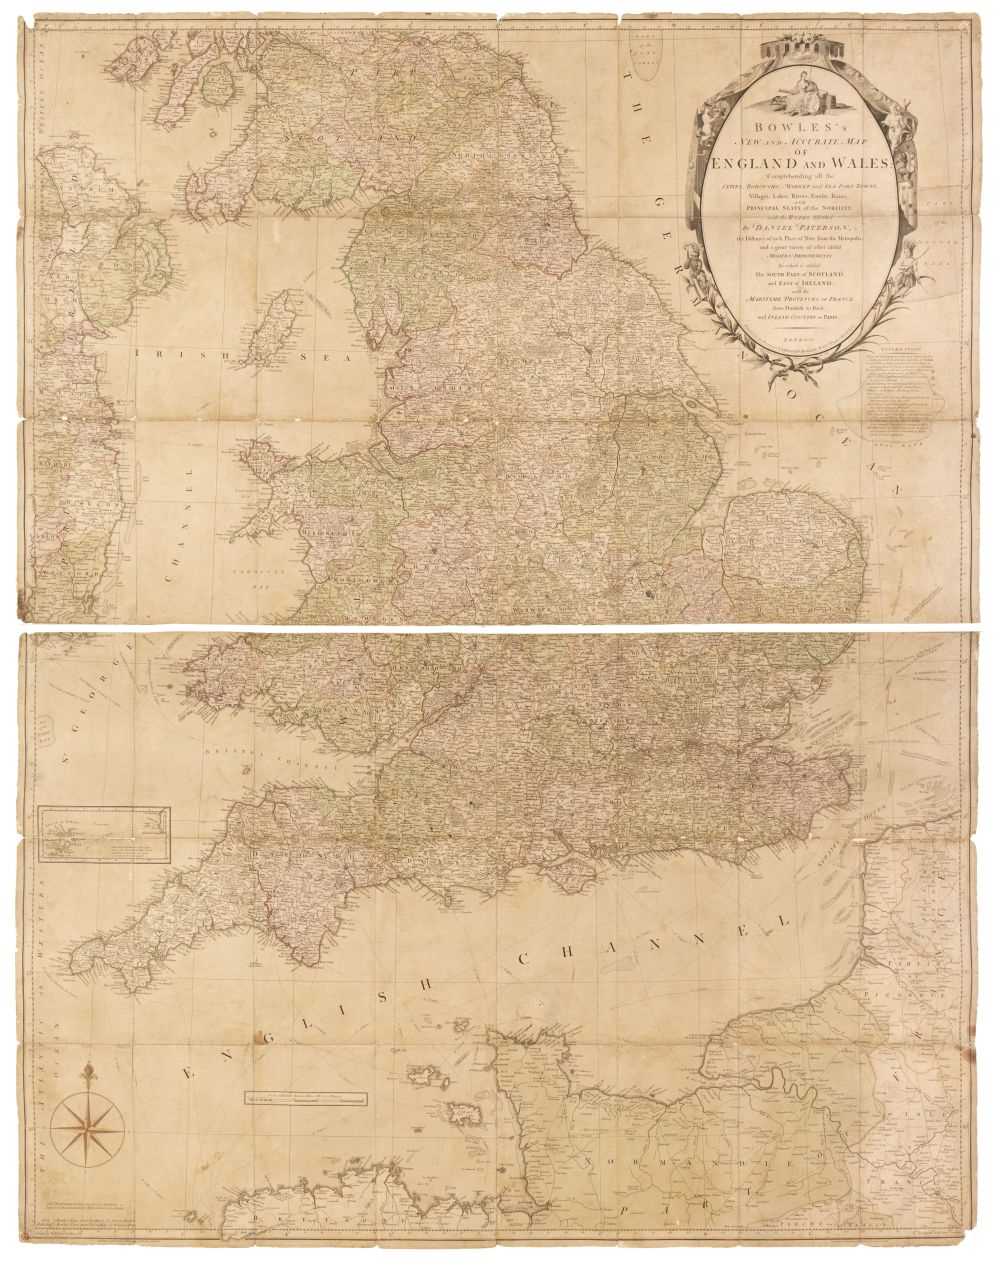 Lot 12 - England & Wales. C. Bowles (publisher), Bowles's..., Map of England and Wales, 1782